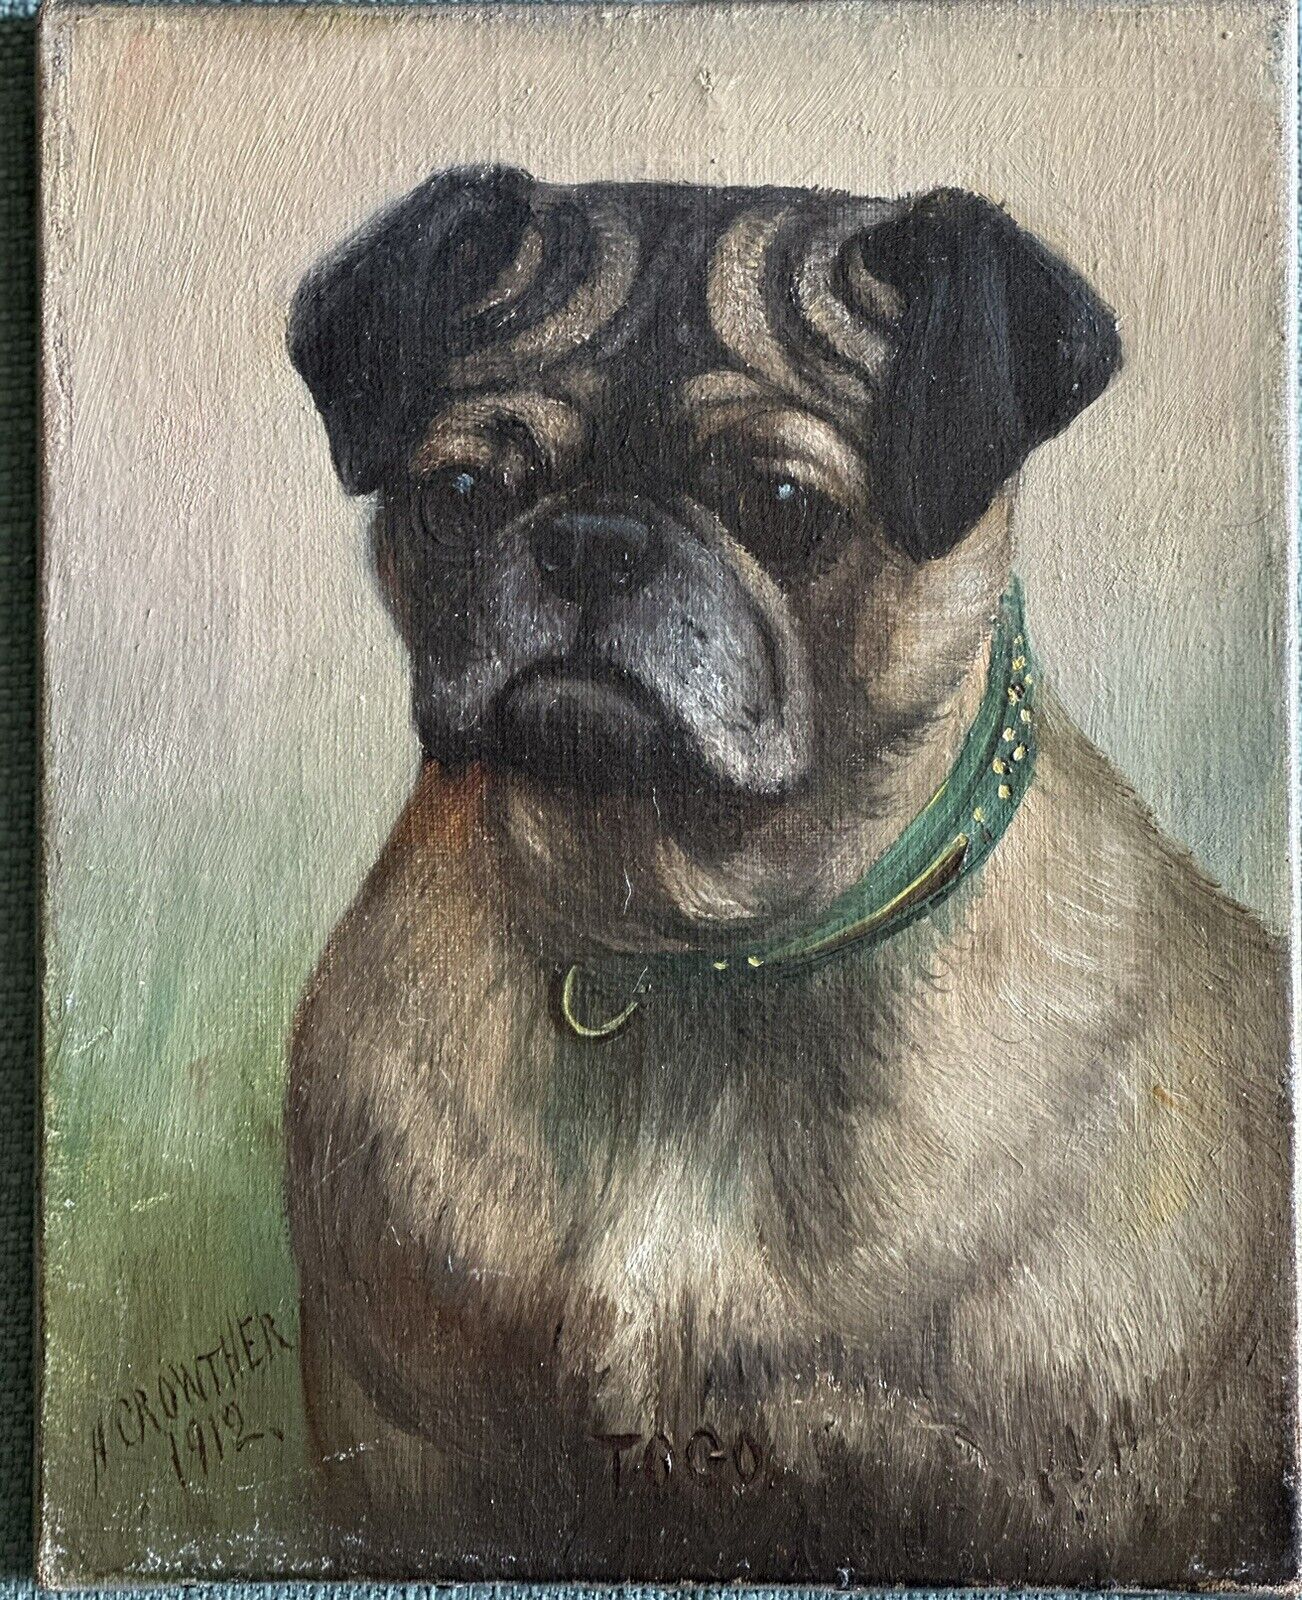 Antique Pug dog oil painting Henry Crowther 1912 “Togo”